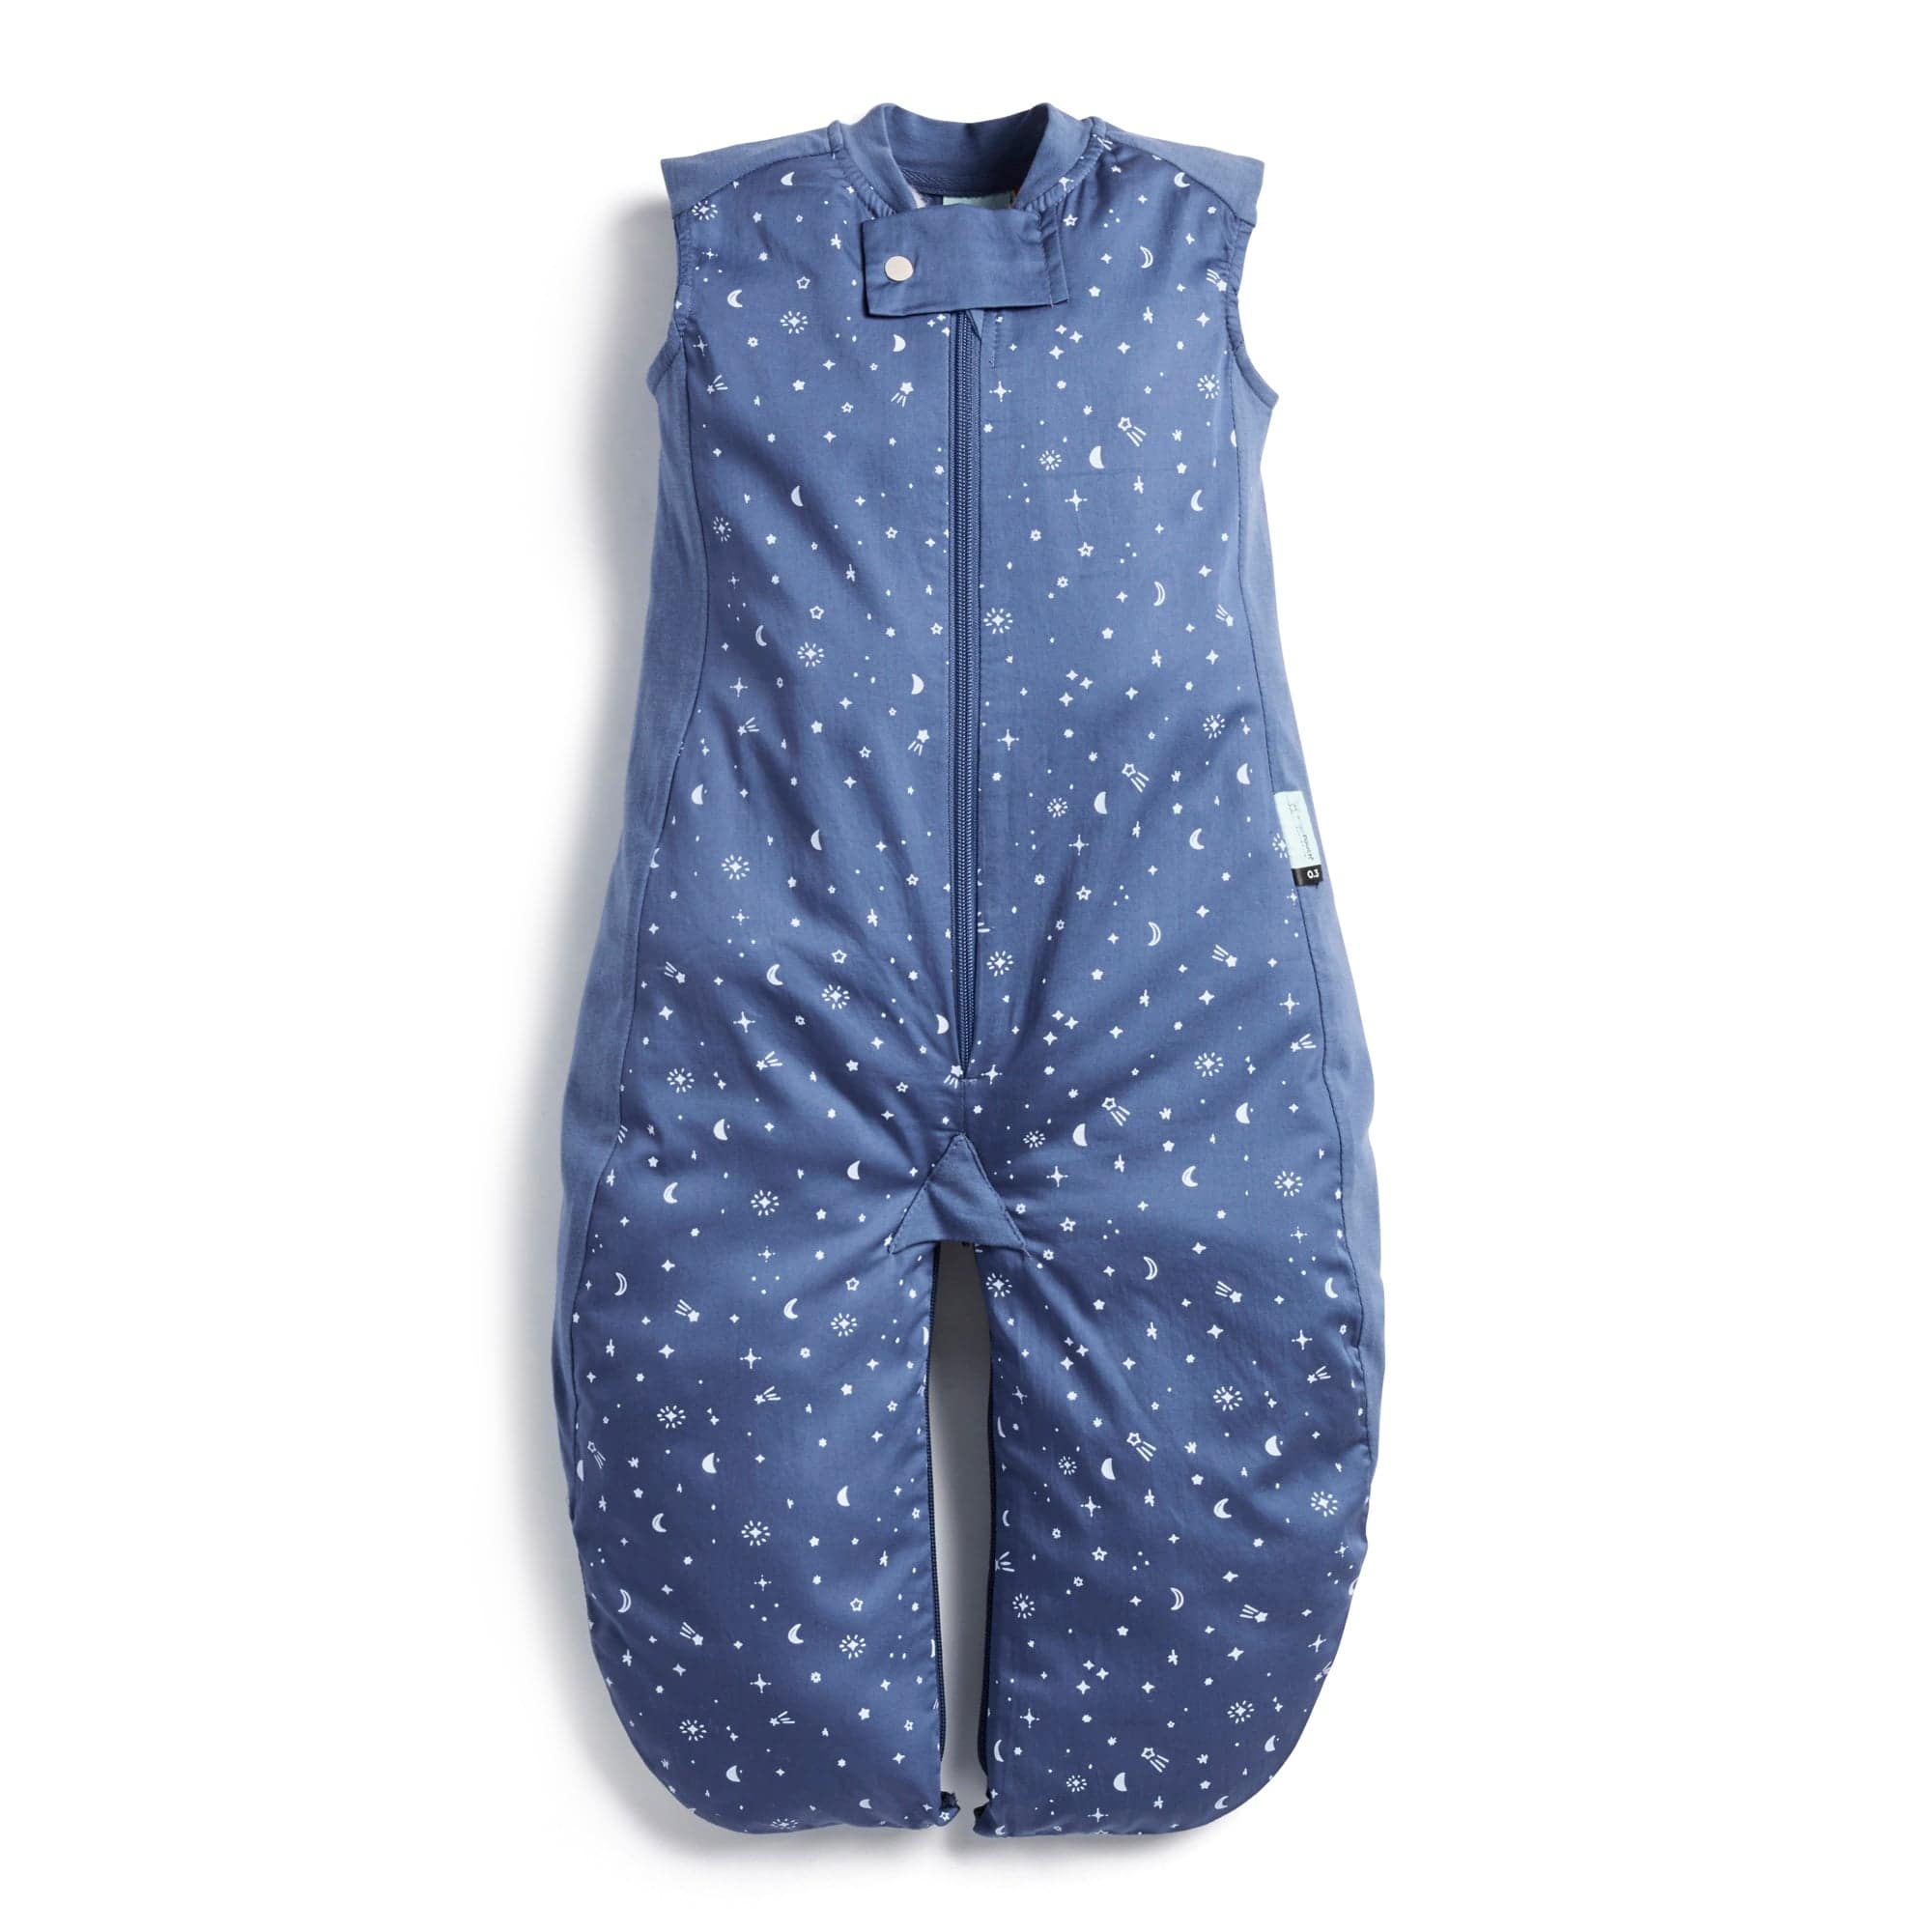 Sleep Suit Bag 0.3 Tog For Kids By ergoPouch - Night Sky